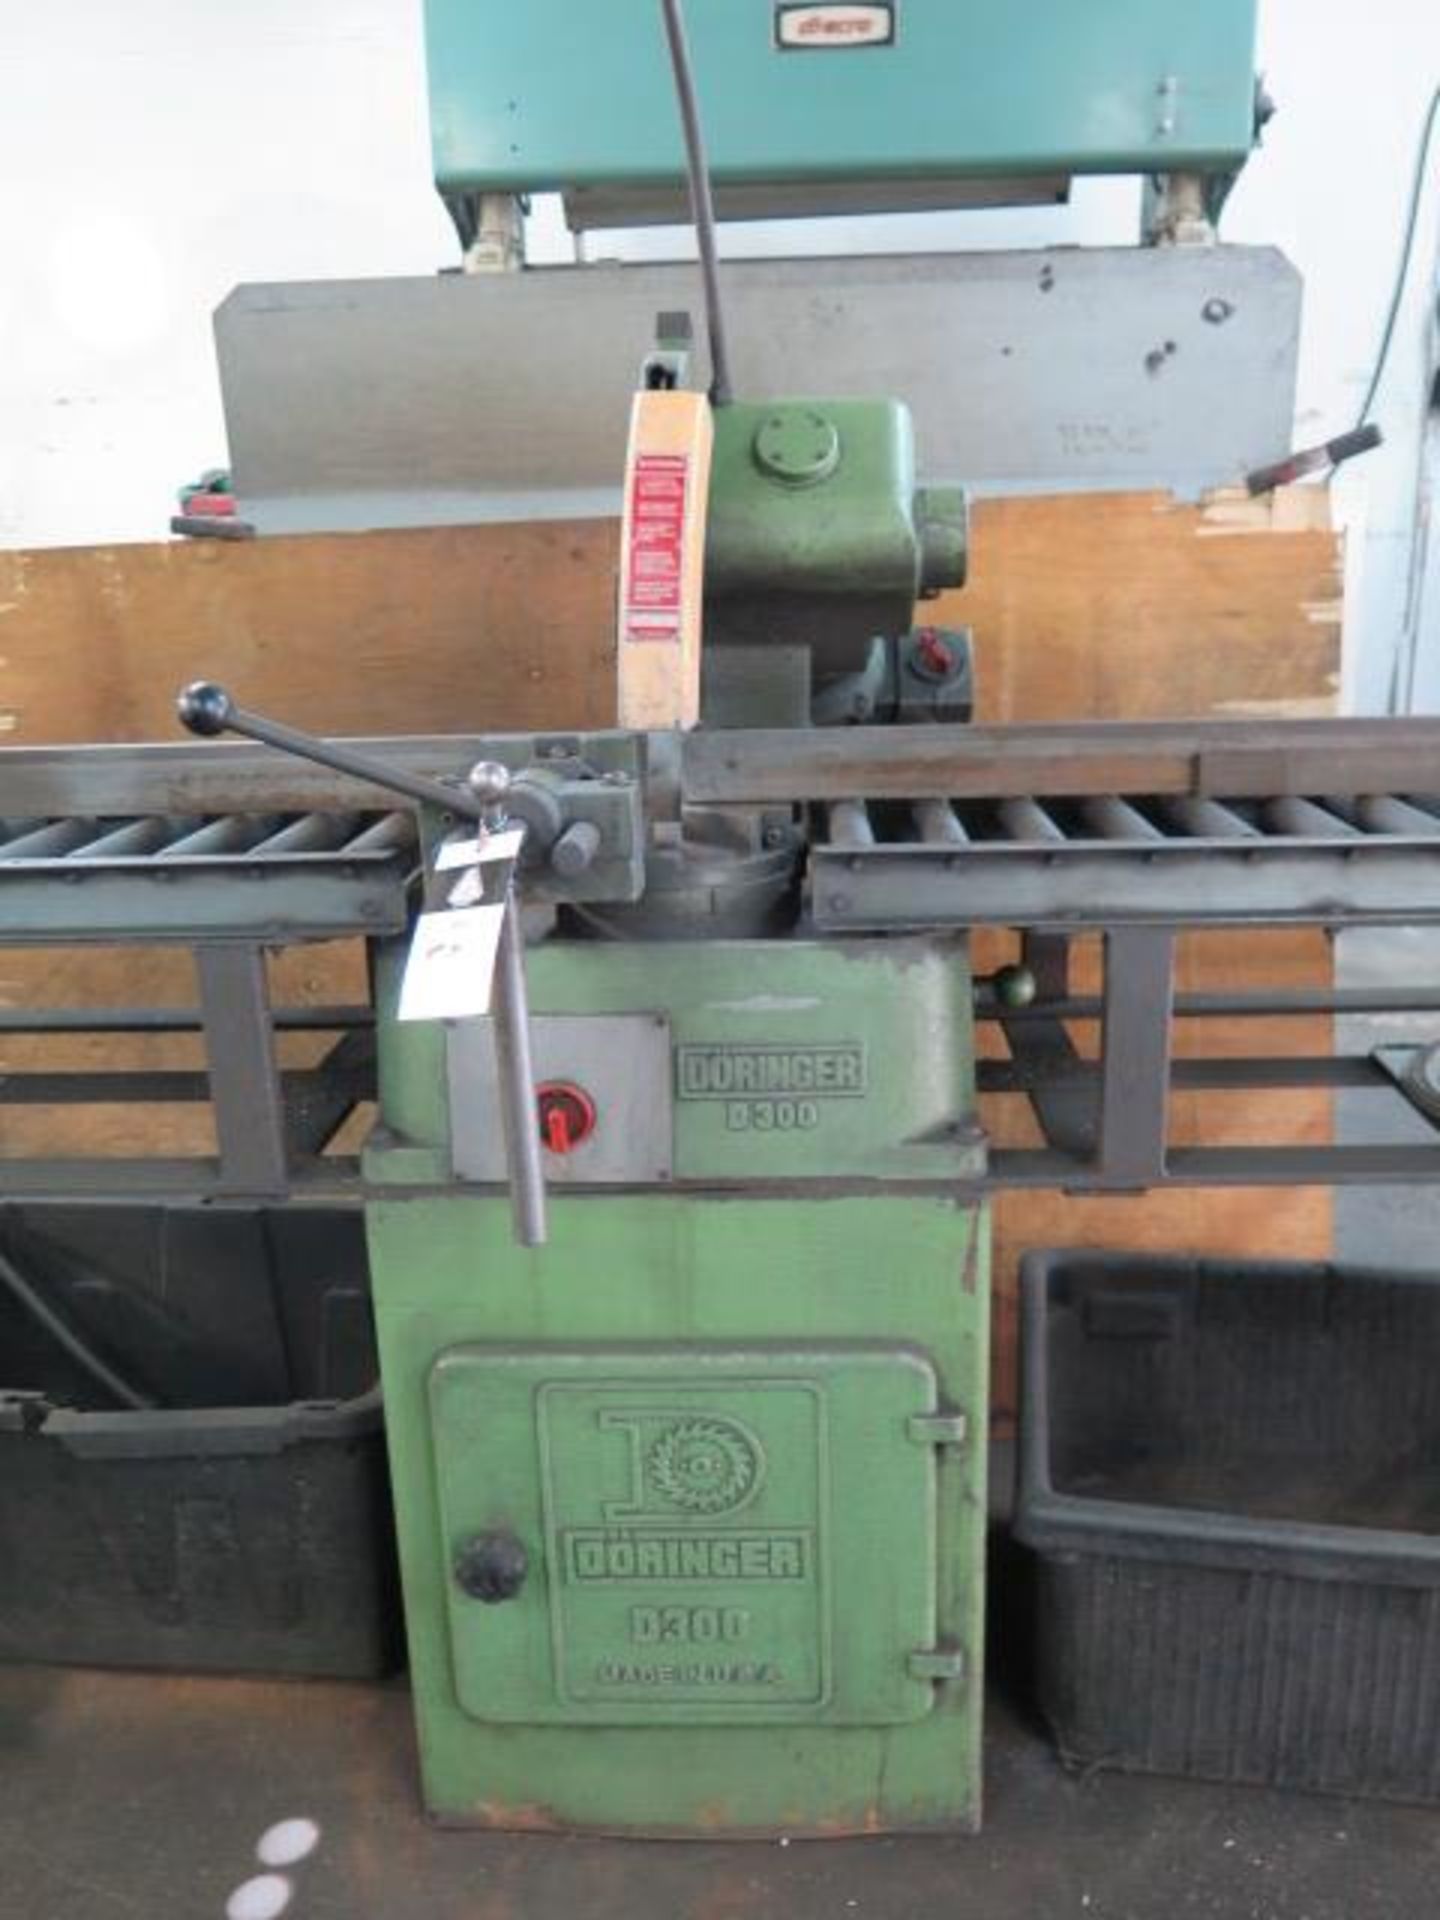 Doringer D-300 Miter Cold Saw s/n 18417 w/ 2-Speeds, Speed Clamping, Extended Table, SOLD AS IS - Image 4 of 16